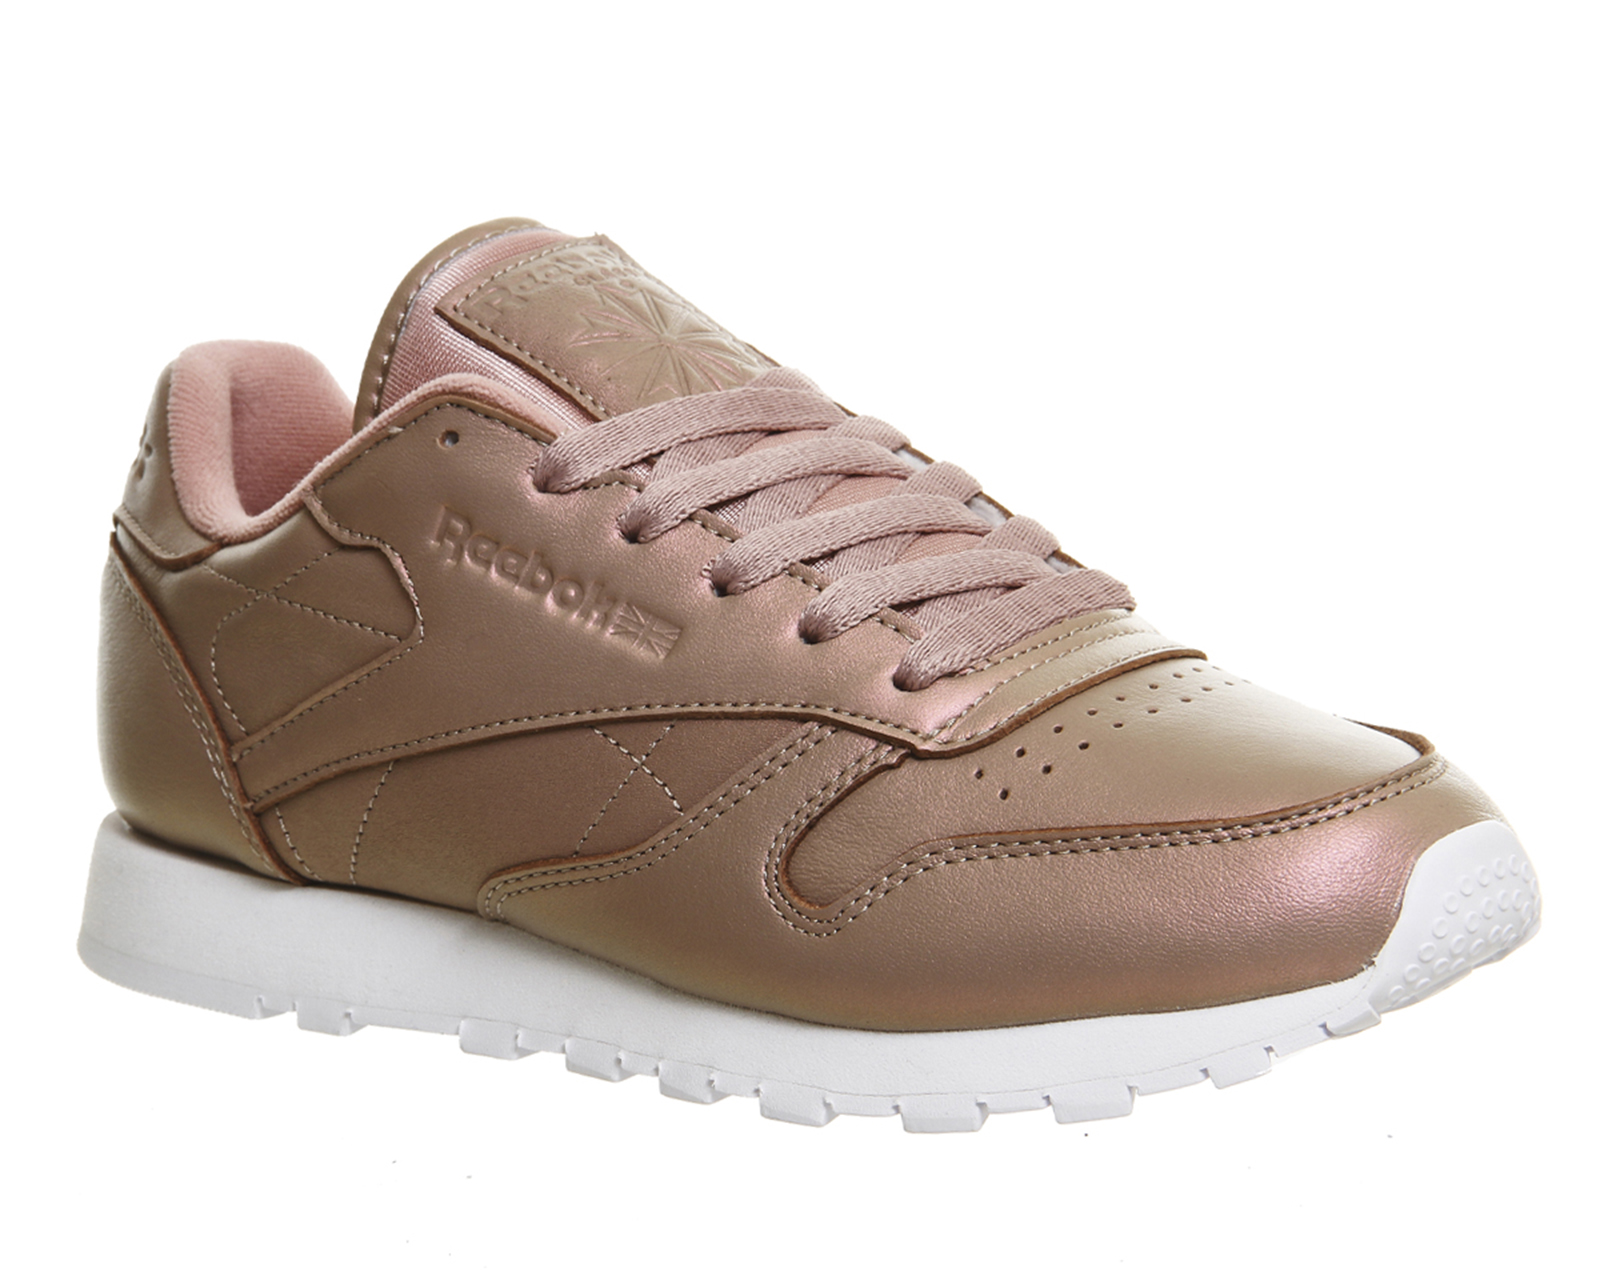 reebok classic leather sneakers in rose gold pearl